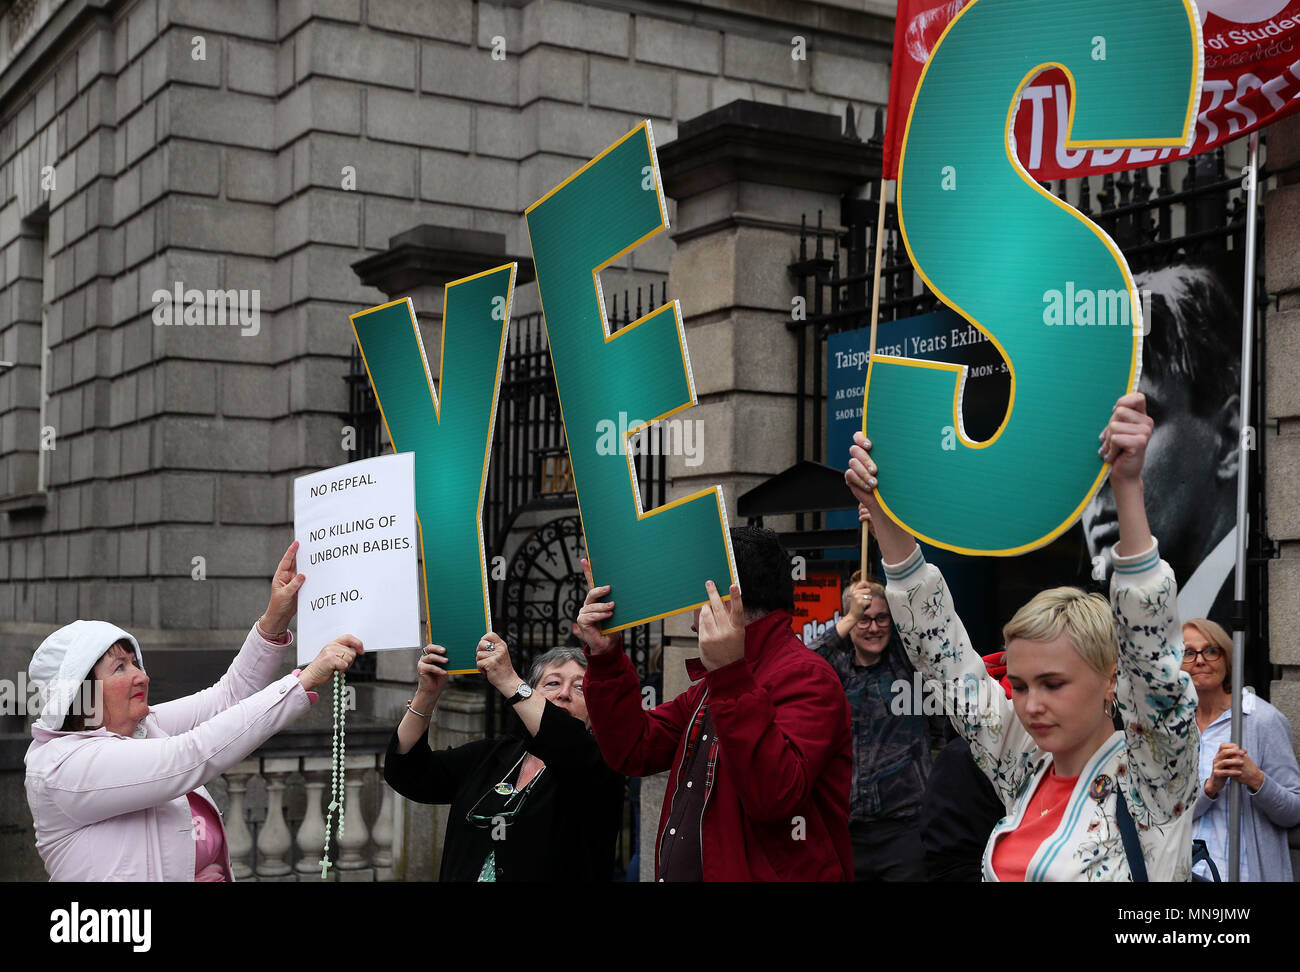 An anti-abortion campaigner holds a sign up in front of pro-choice campaigners outside Leinster House, Dublin, ahead of the referendum on the 8th Amendment of the Irish Constitution on May 25th. Stock Photo